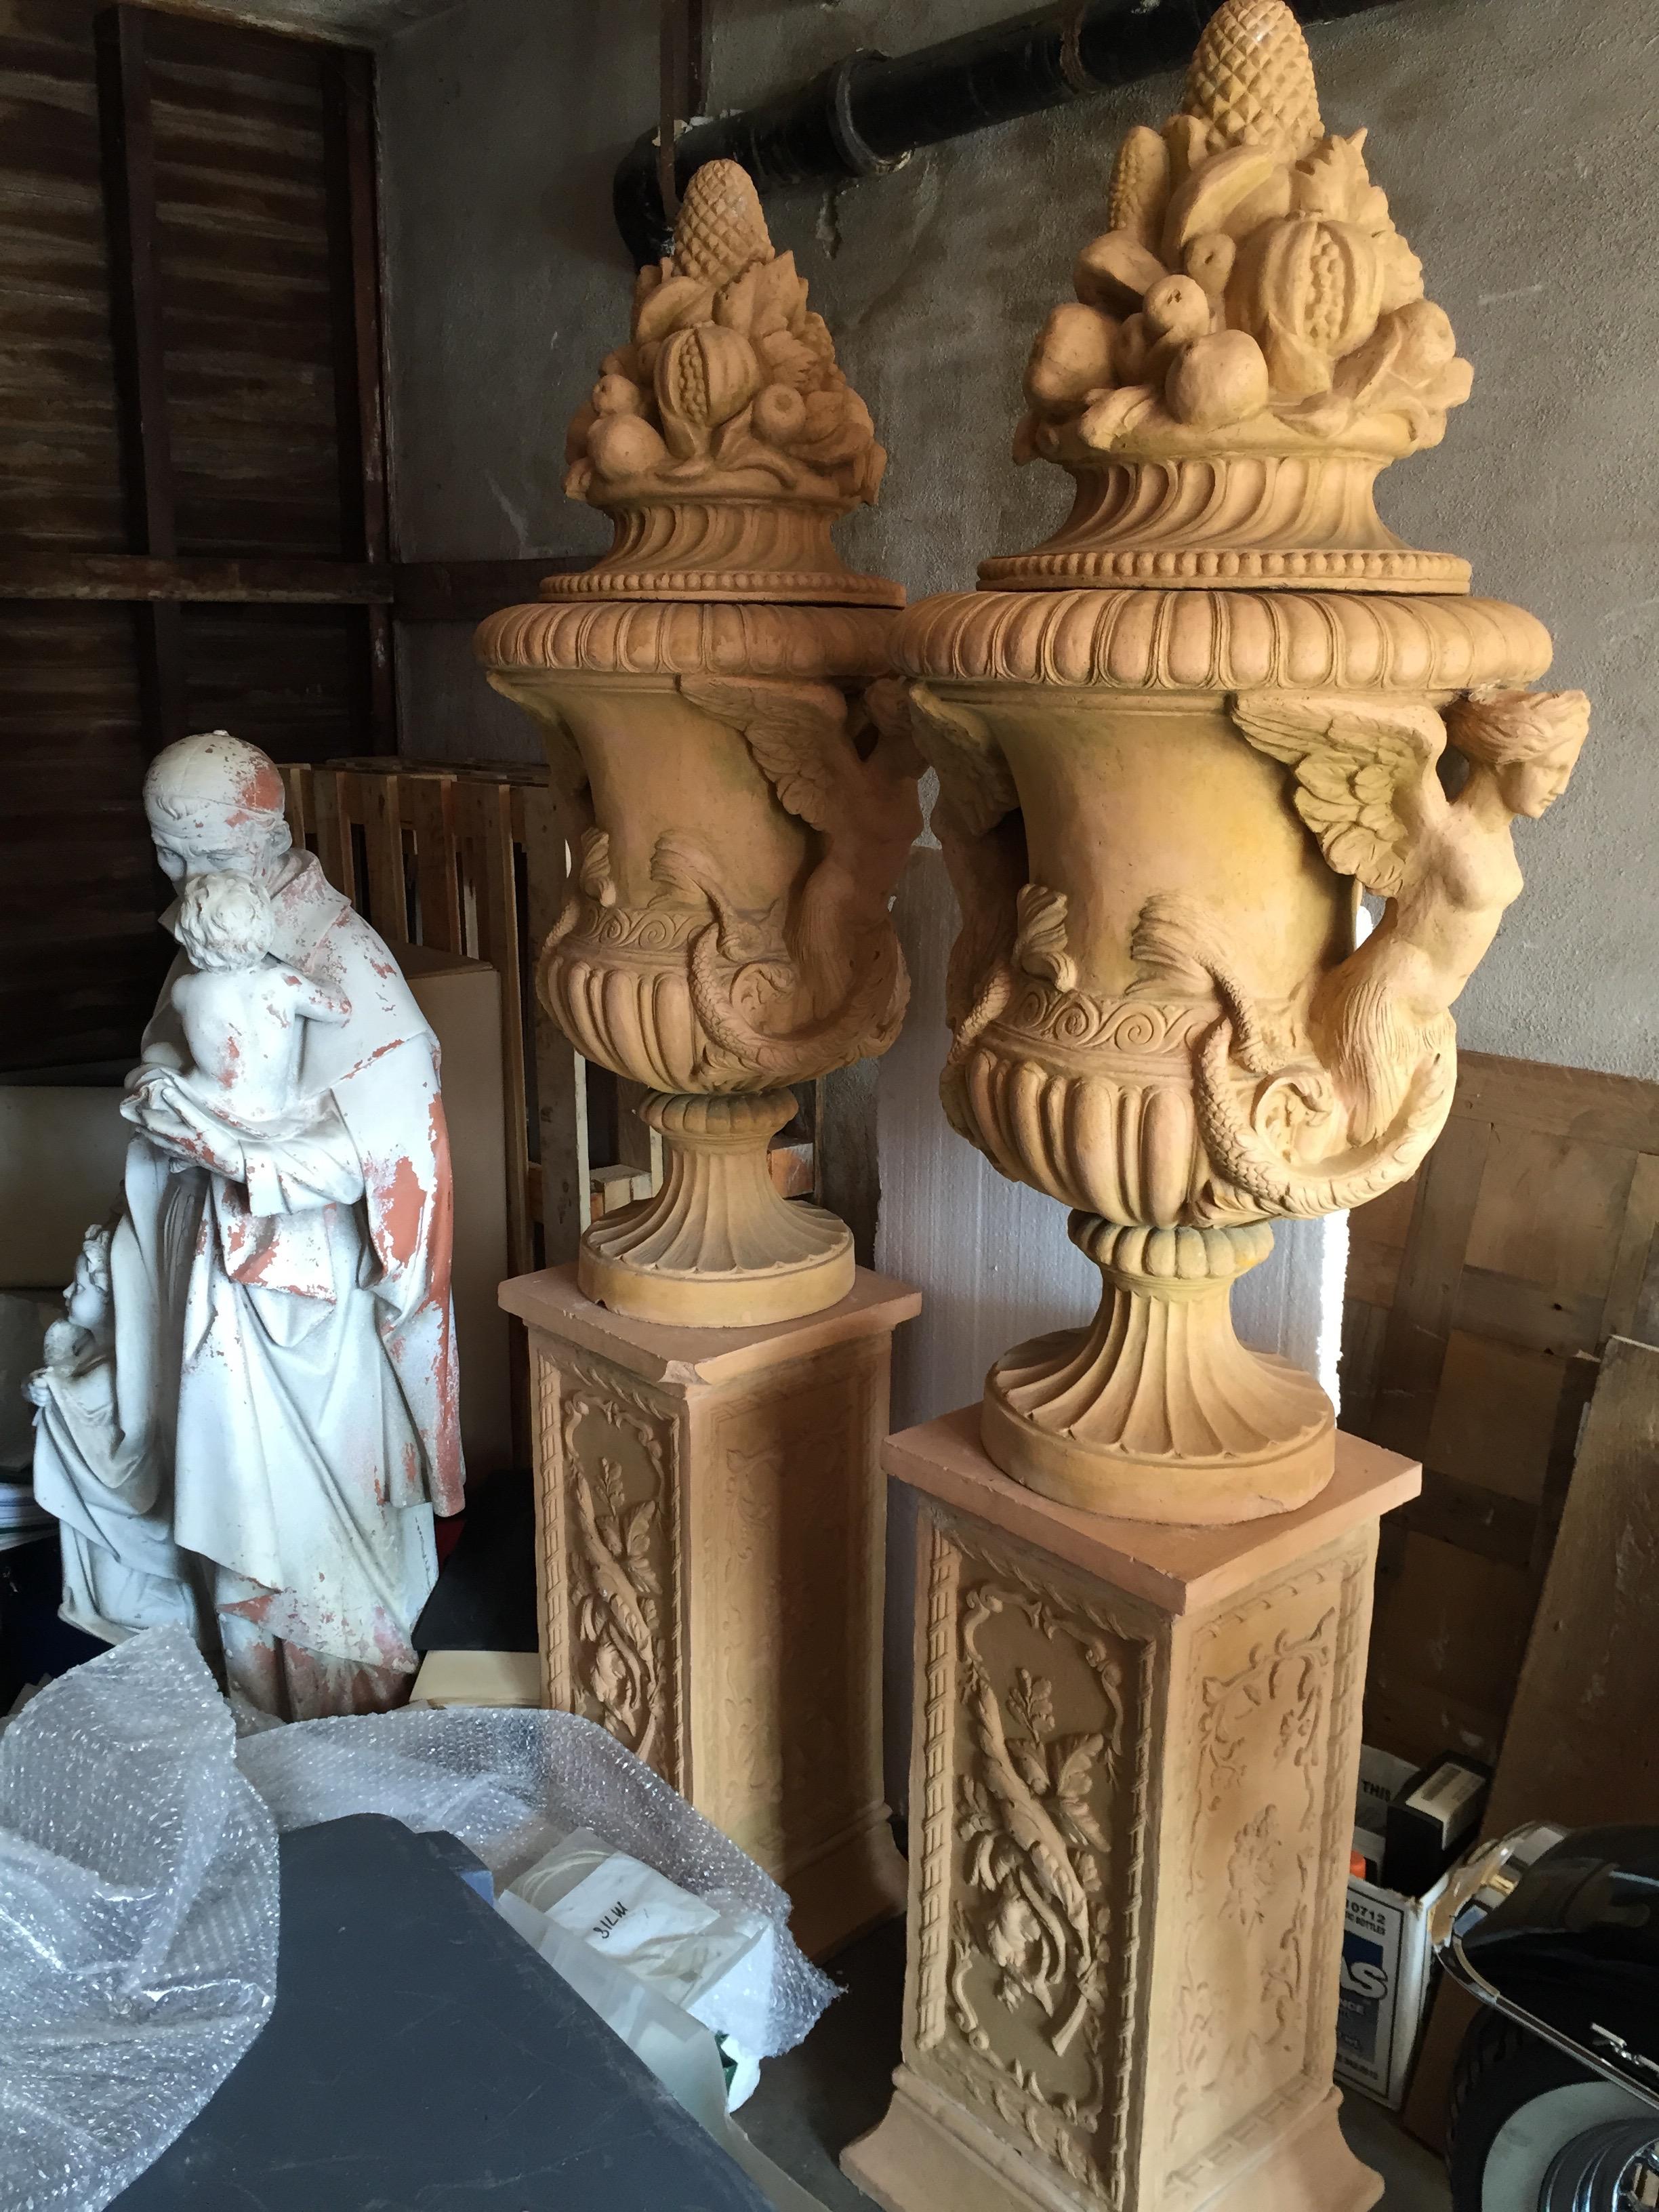 Beautiful pair of Renaissance Mediterranean style urns in terra cotta, late 20th century.
With their original pedestals, excellent quality of Art work hand-finished.
Interior and exterior display possible, great condition.
More info on demand.
